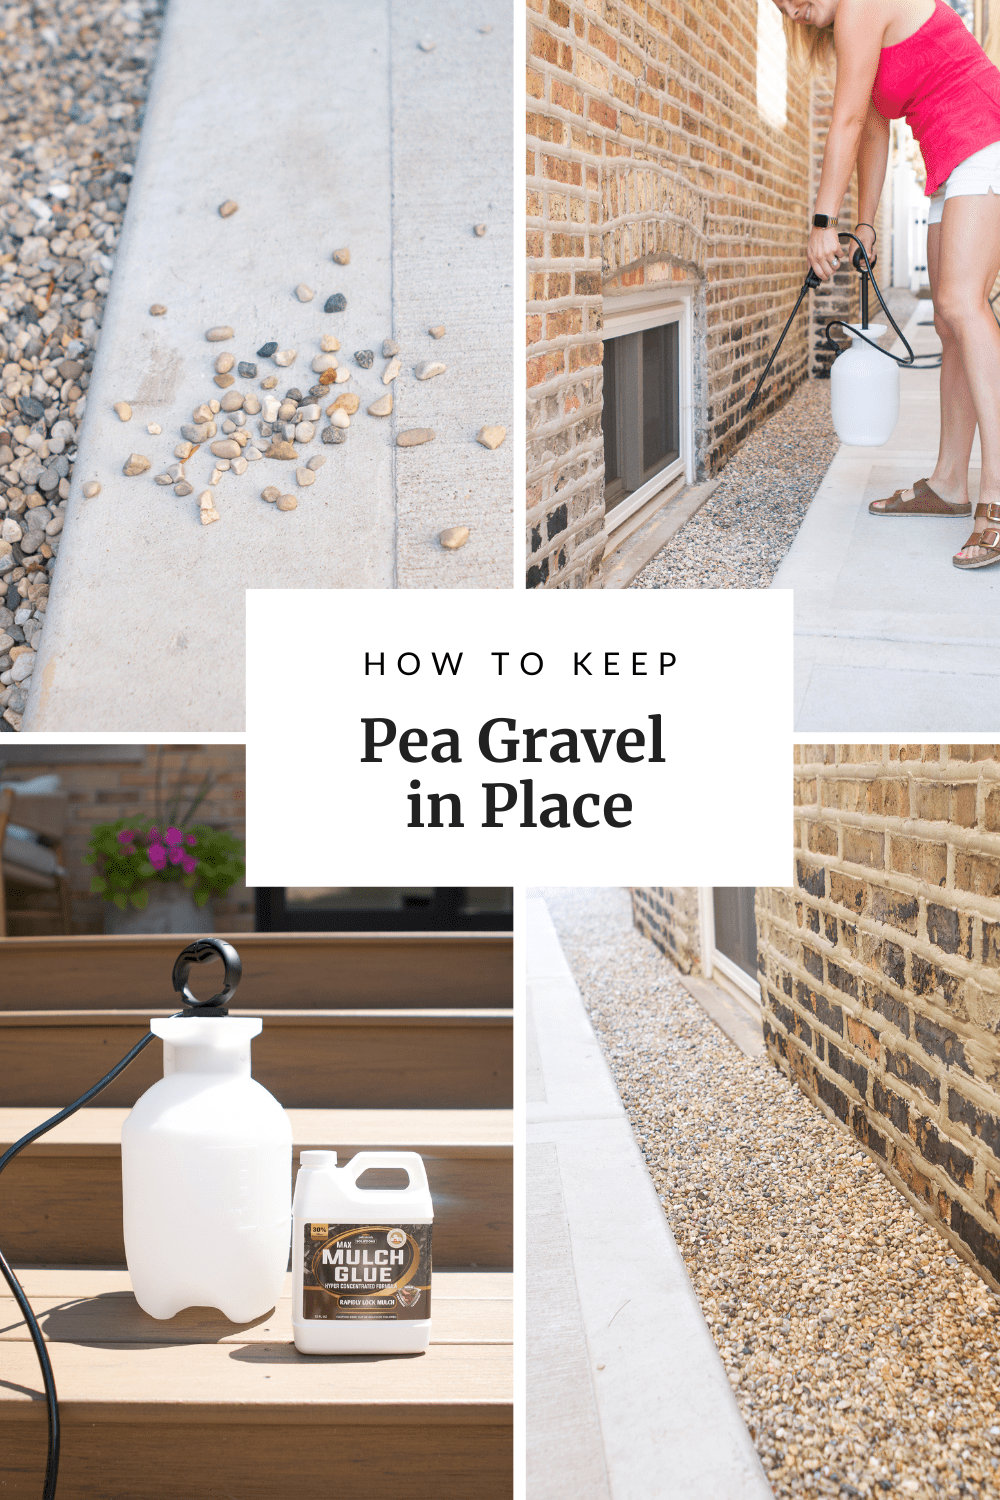 Using mulch glue to keep pea gravel in place